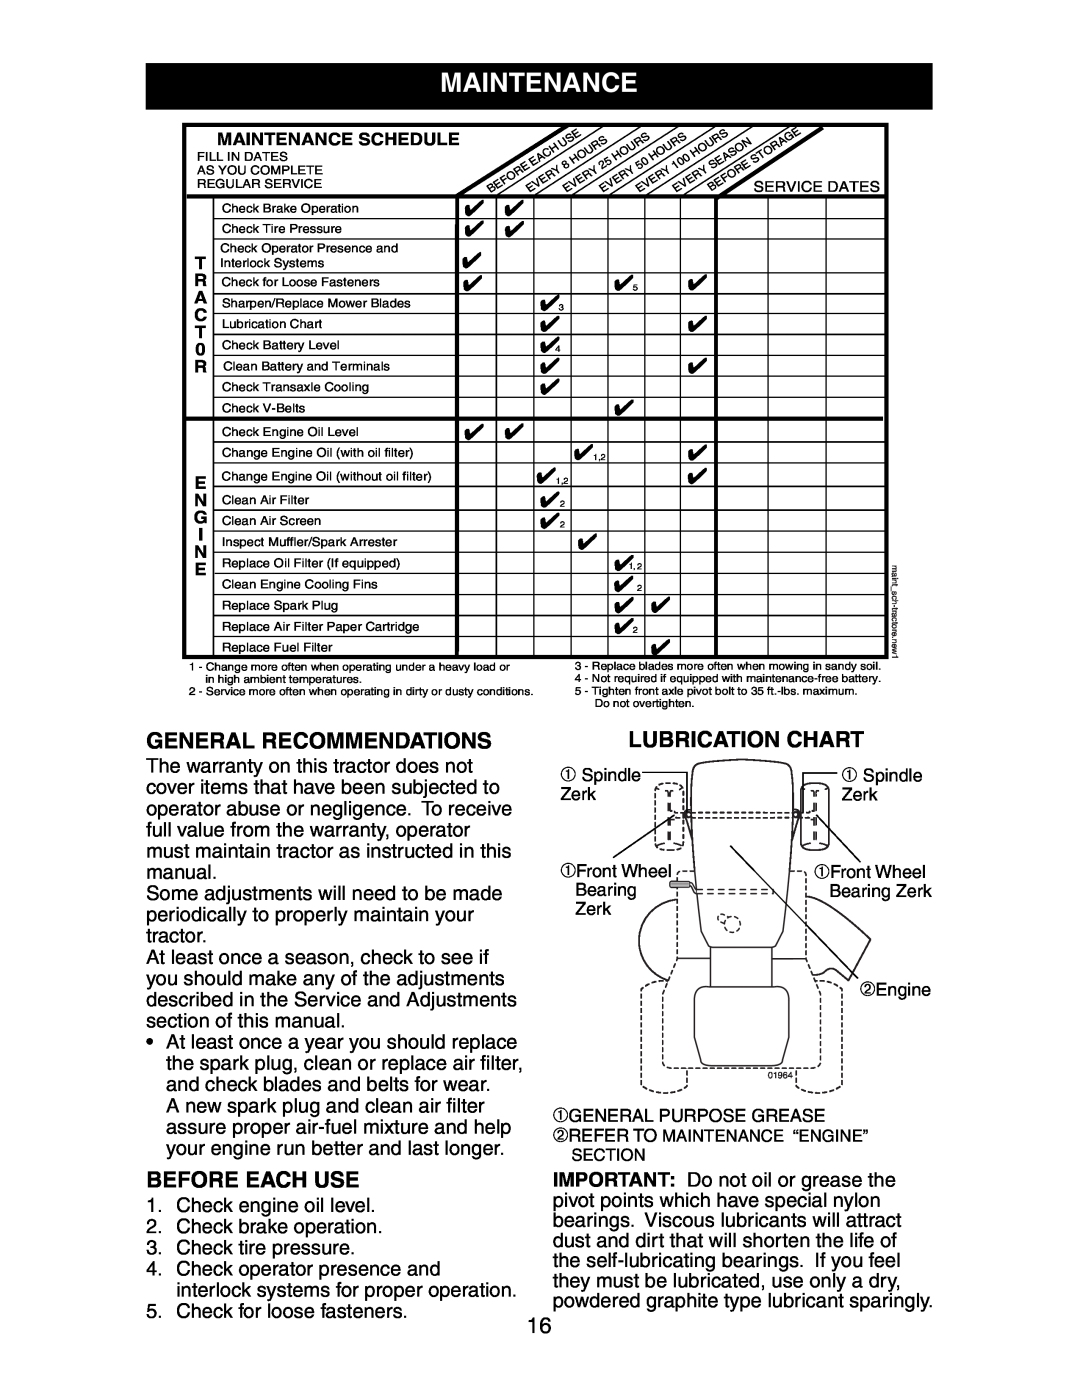 Poulan 271190, 189956 manual Maintenance, General Recommendations, Lubrication Chart, Before Each Use 